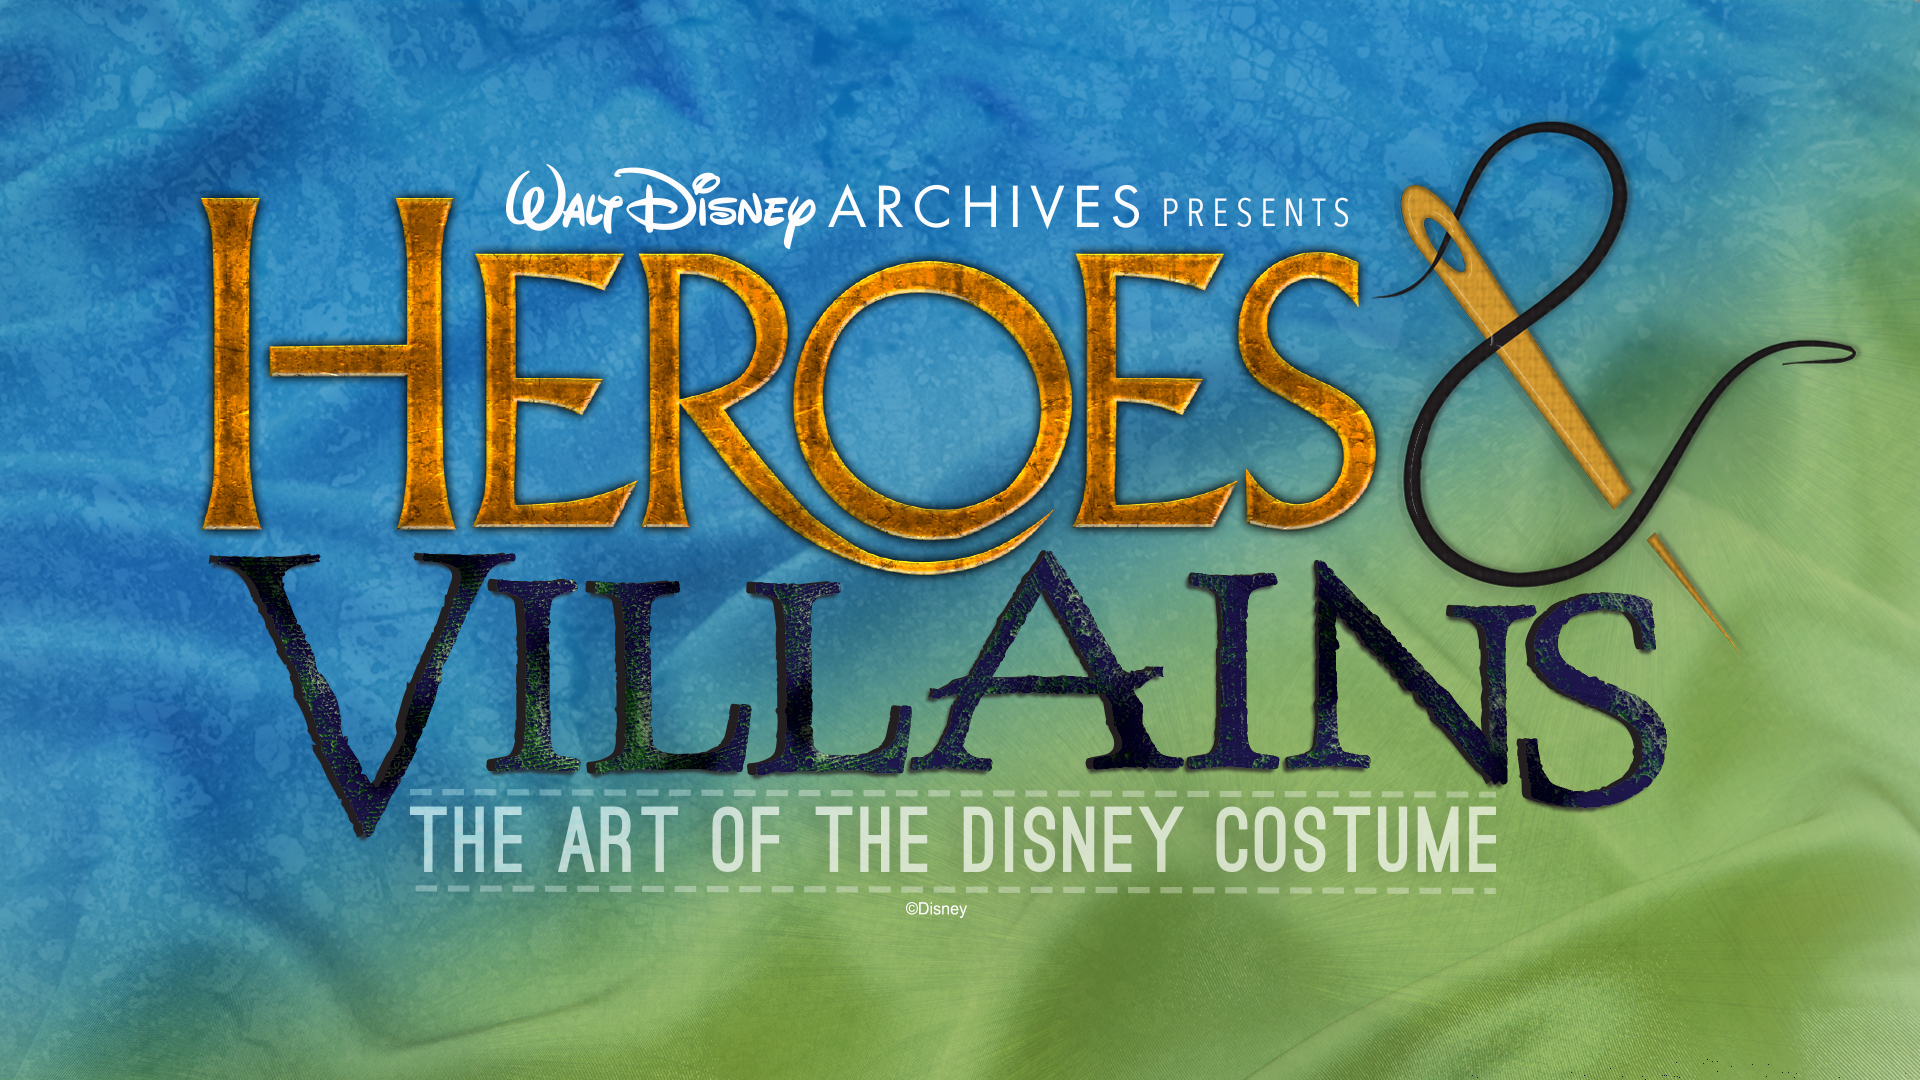 Brand-New Walt Disney Archives Exhibit Celebrating Disney’s MostIconic Heroes and Villains to Open at D23 Expo 2019